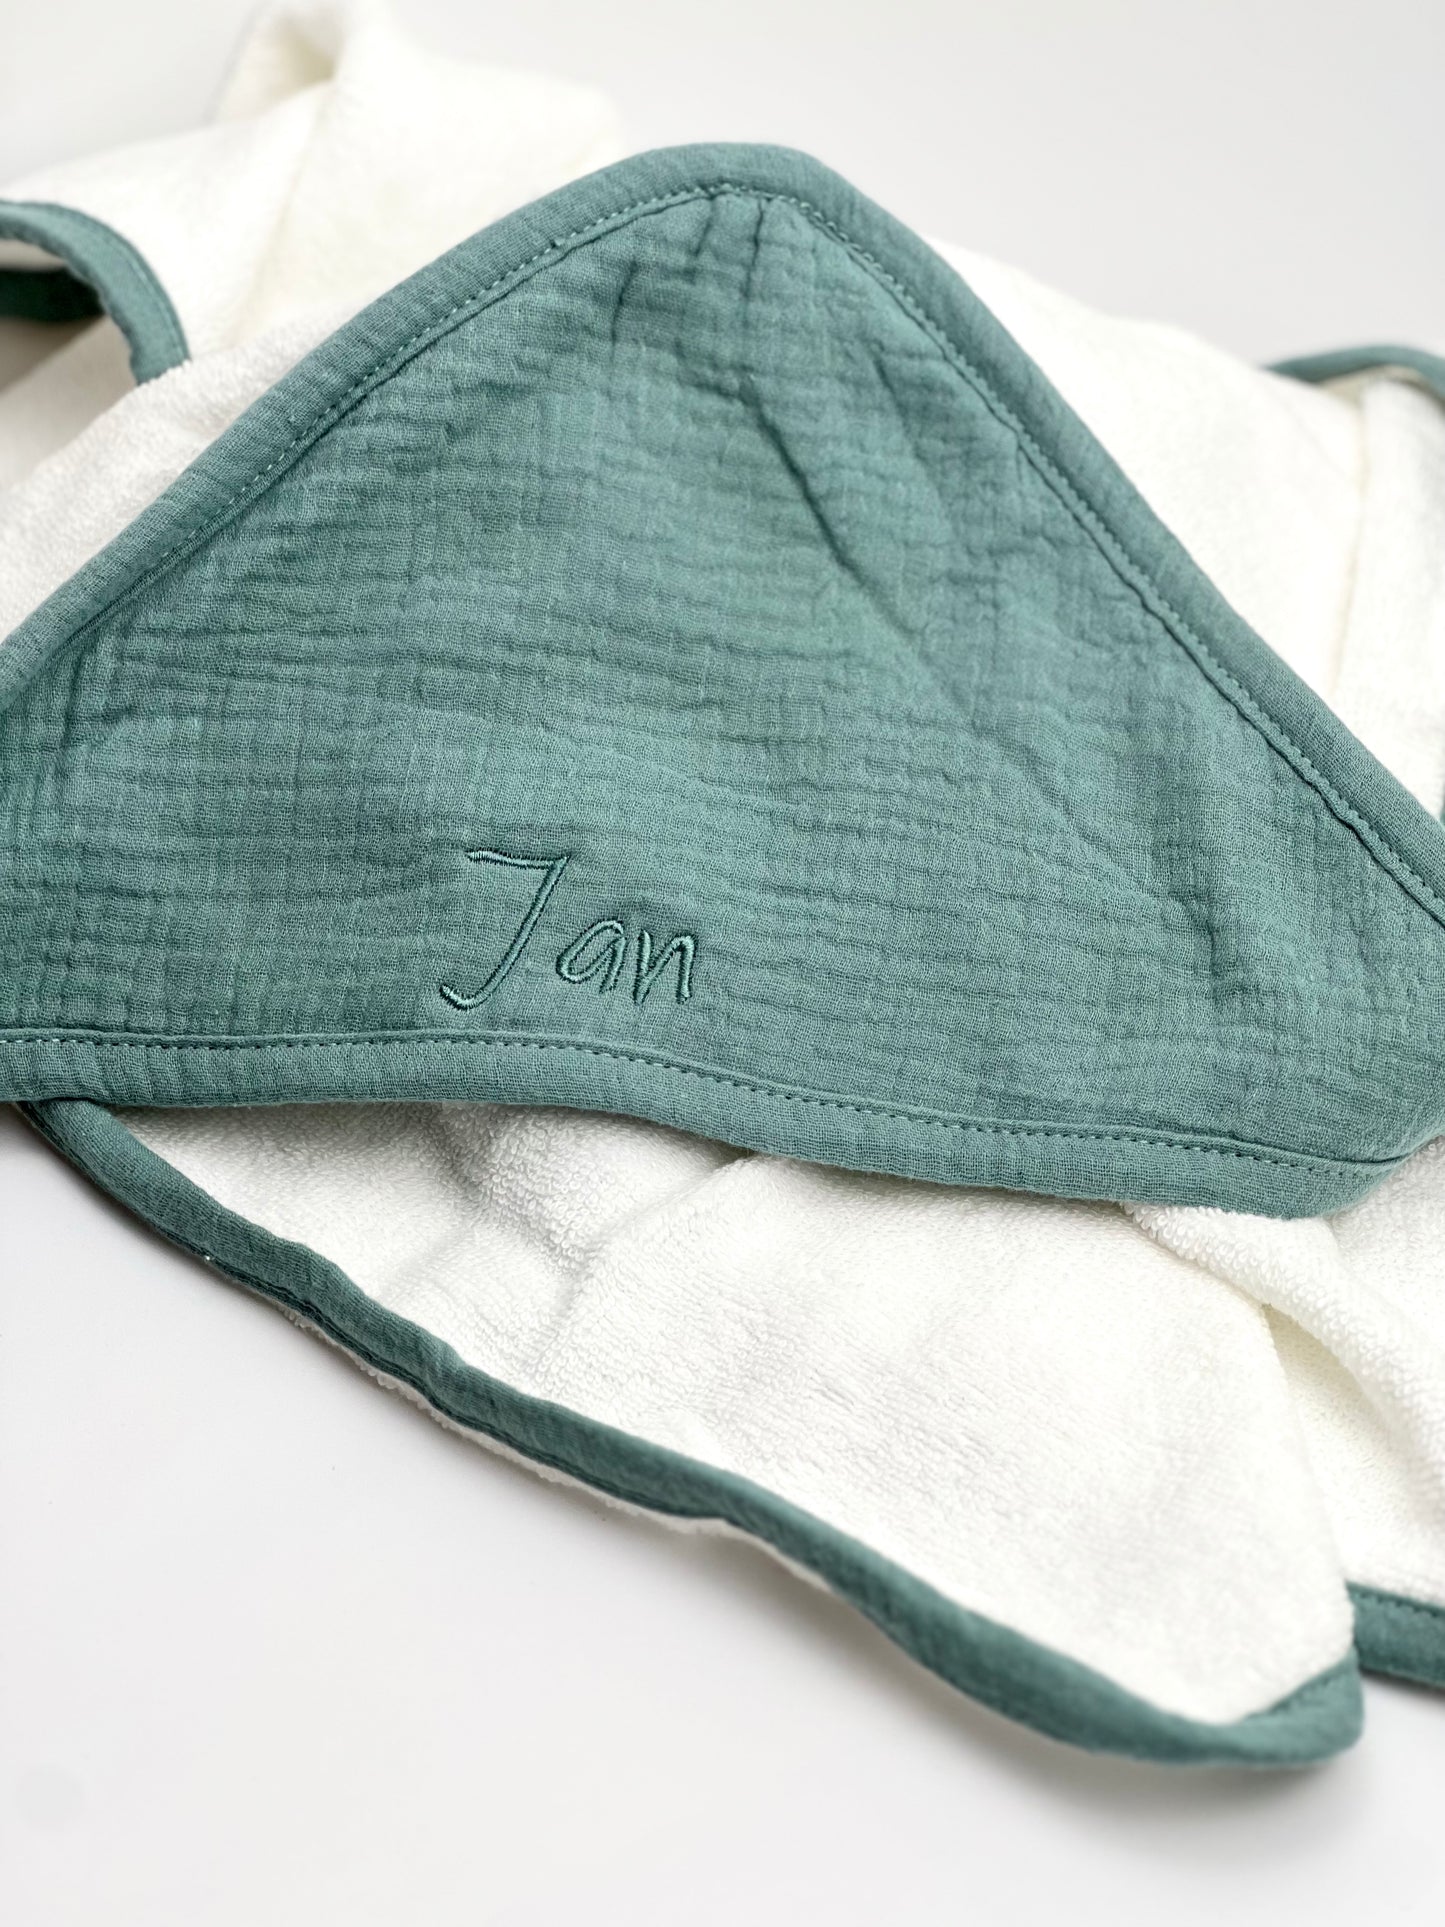 Hooded towel & washcloth set in mint color